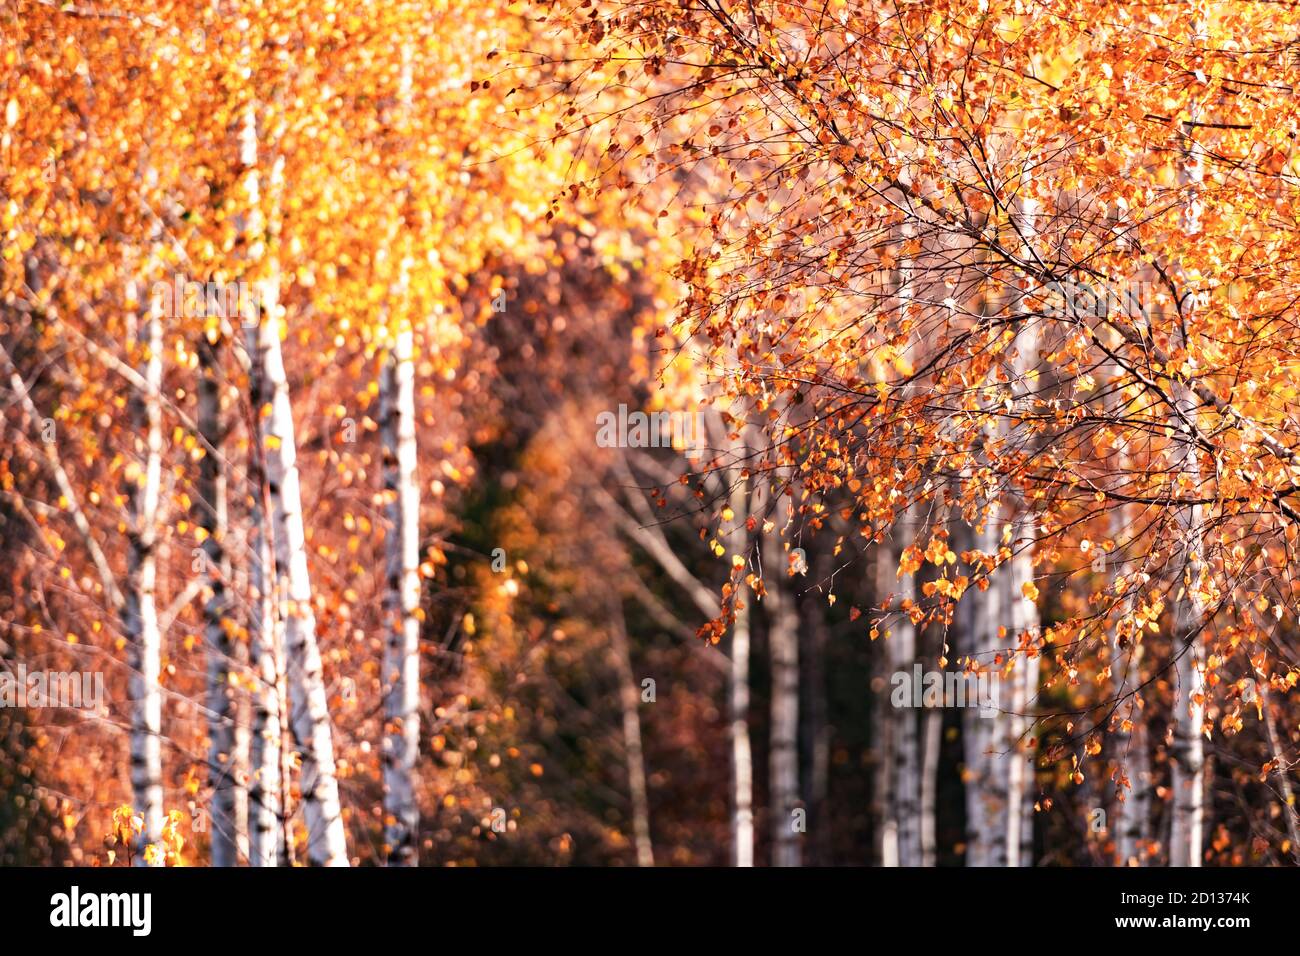 Majestic birch forest with yellow and orange folliage at autumn time. Picturesque fall scene in Carpathian mountains, Ukraine. Landscape photography Stock Photo